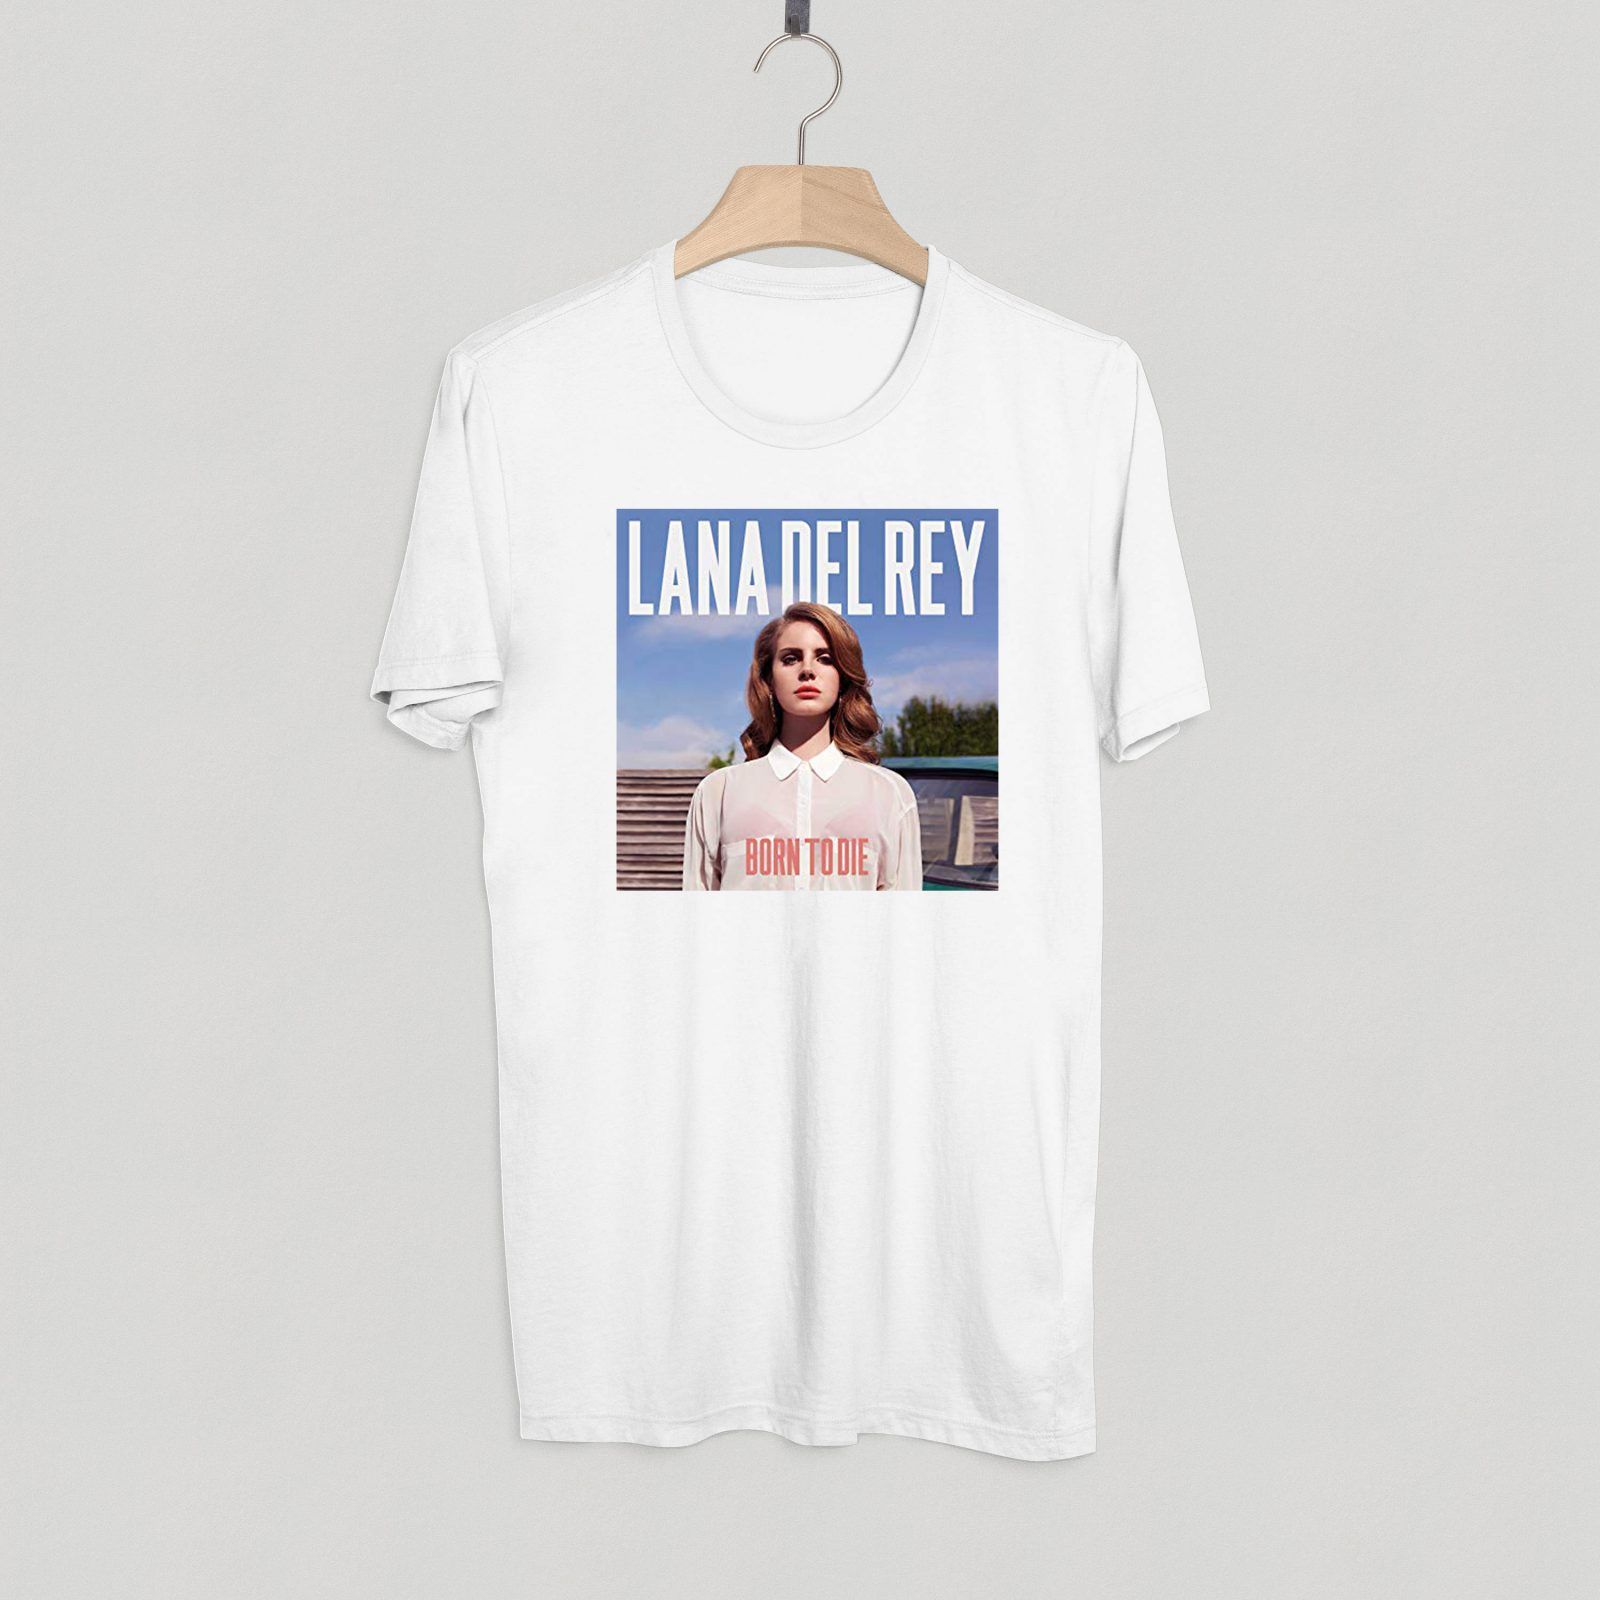 Lana Del Rey T Shirt Adult Unisex Size S 3xl For Men And Women